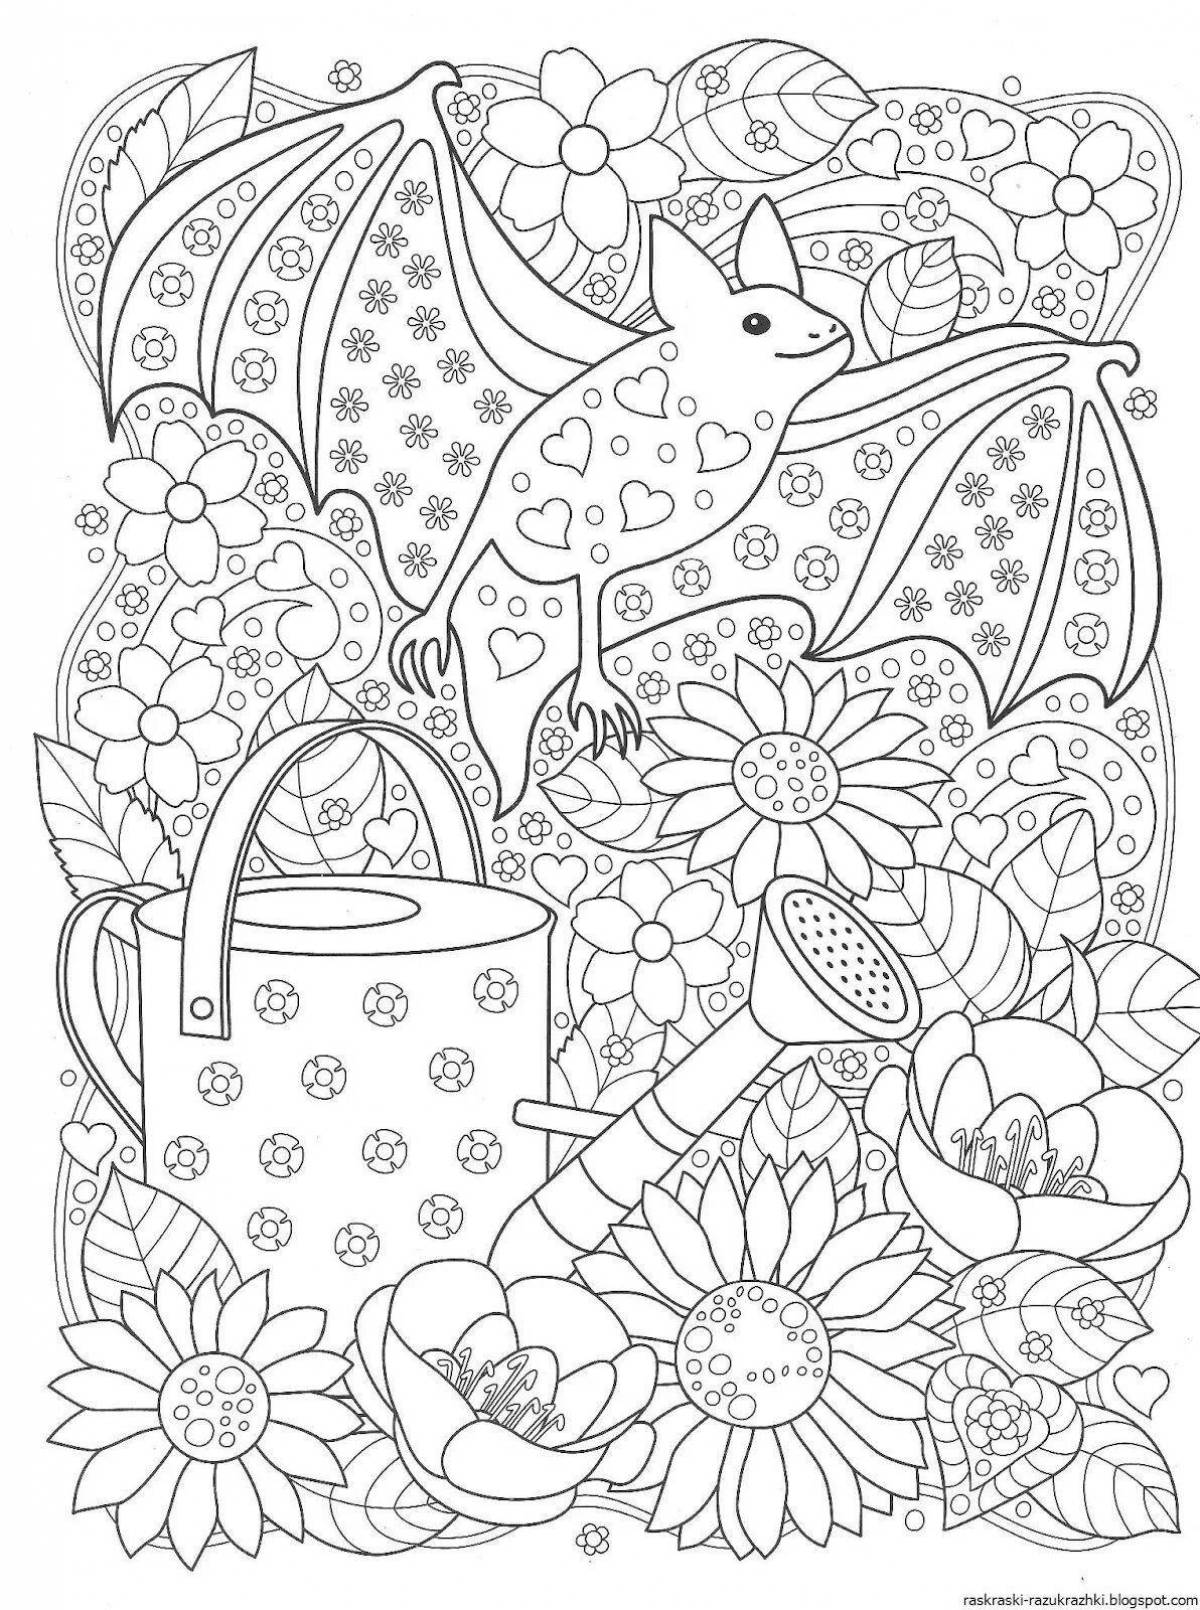 Playful anti-stress coloring book for girls